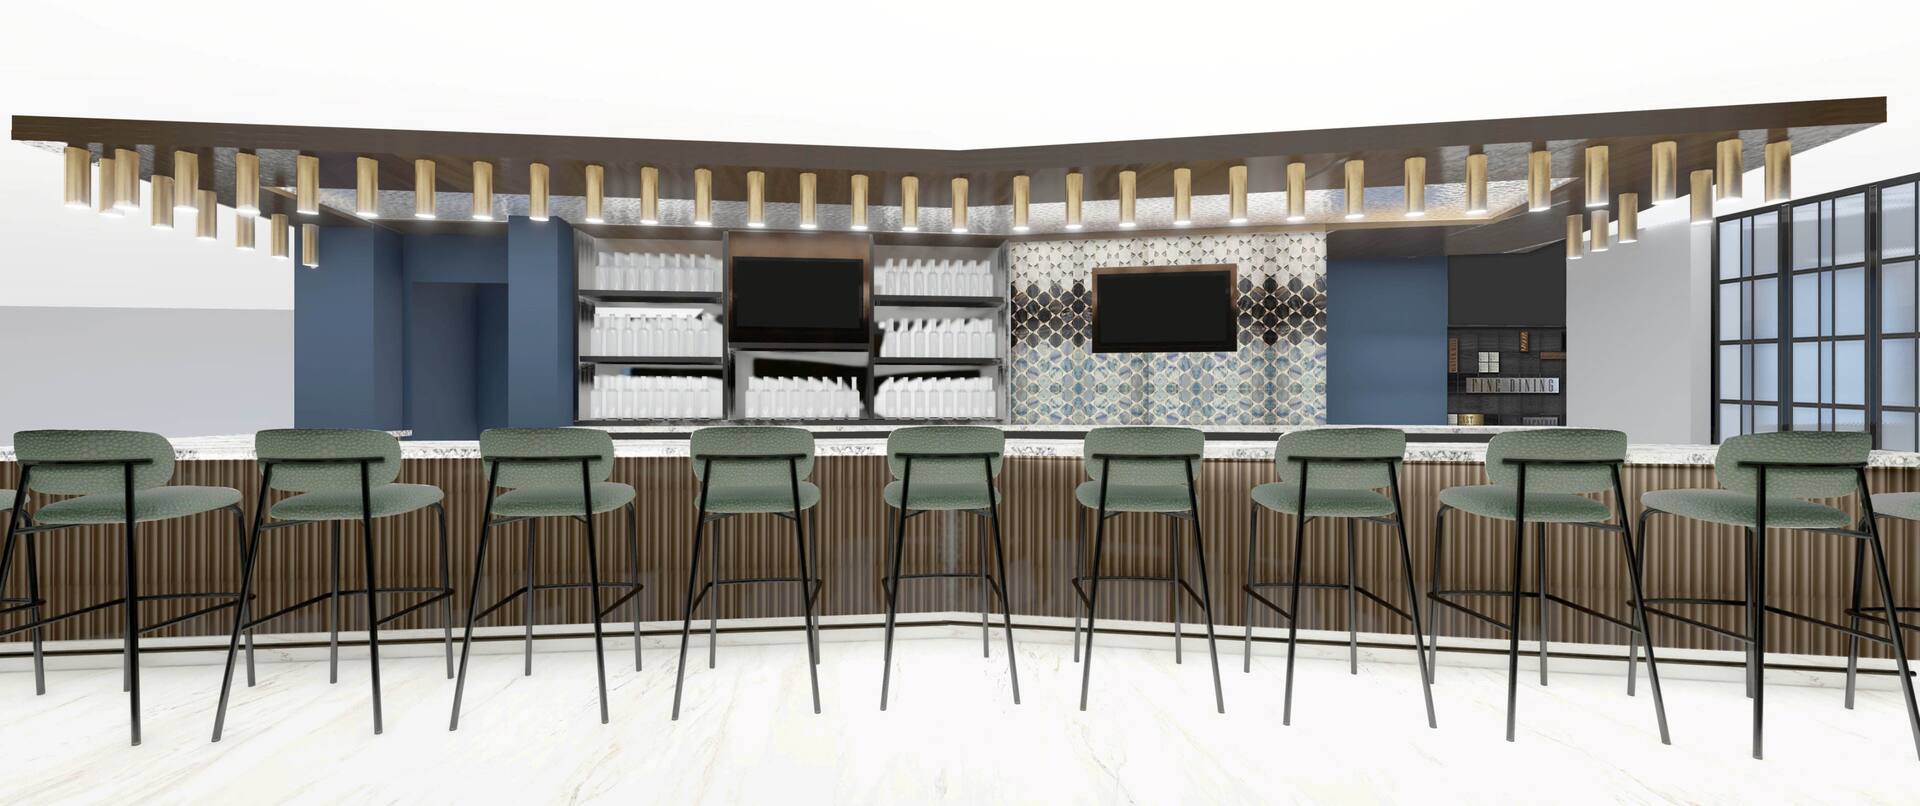 Lobby bar counter with seating